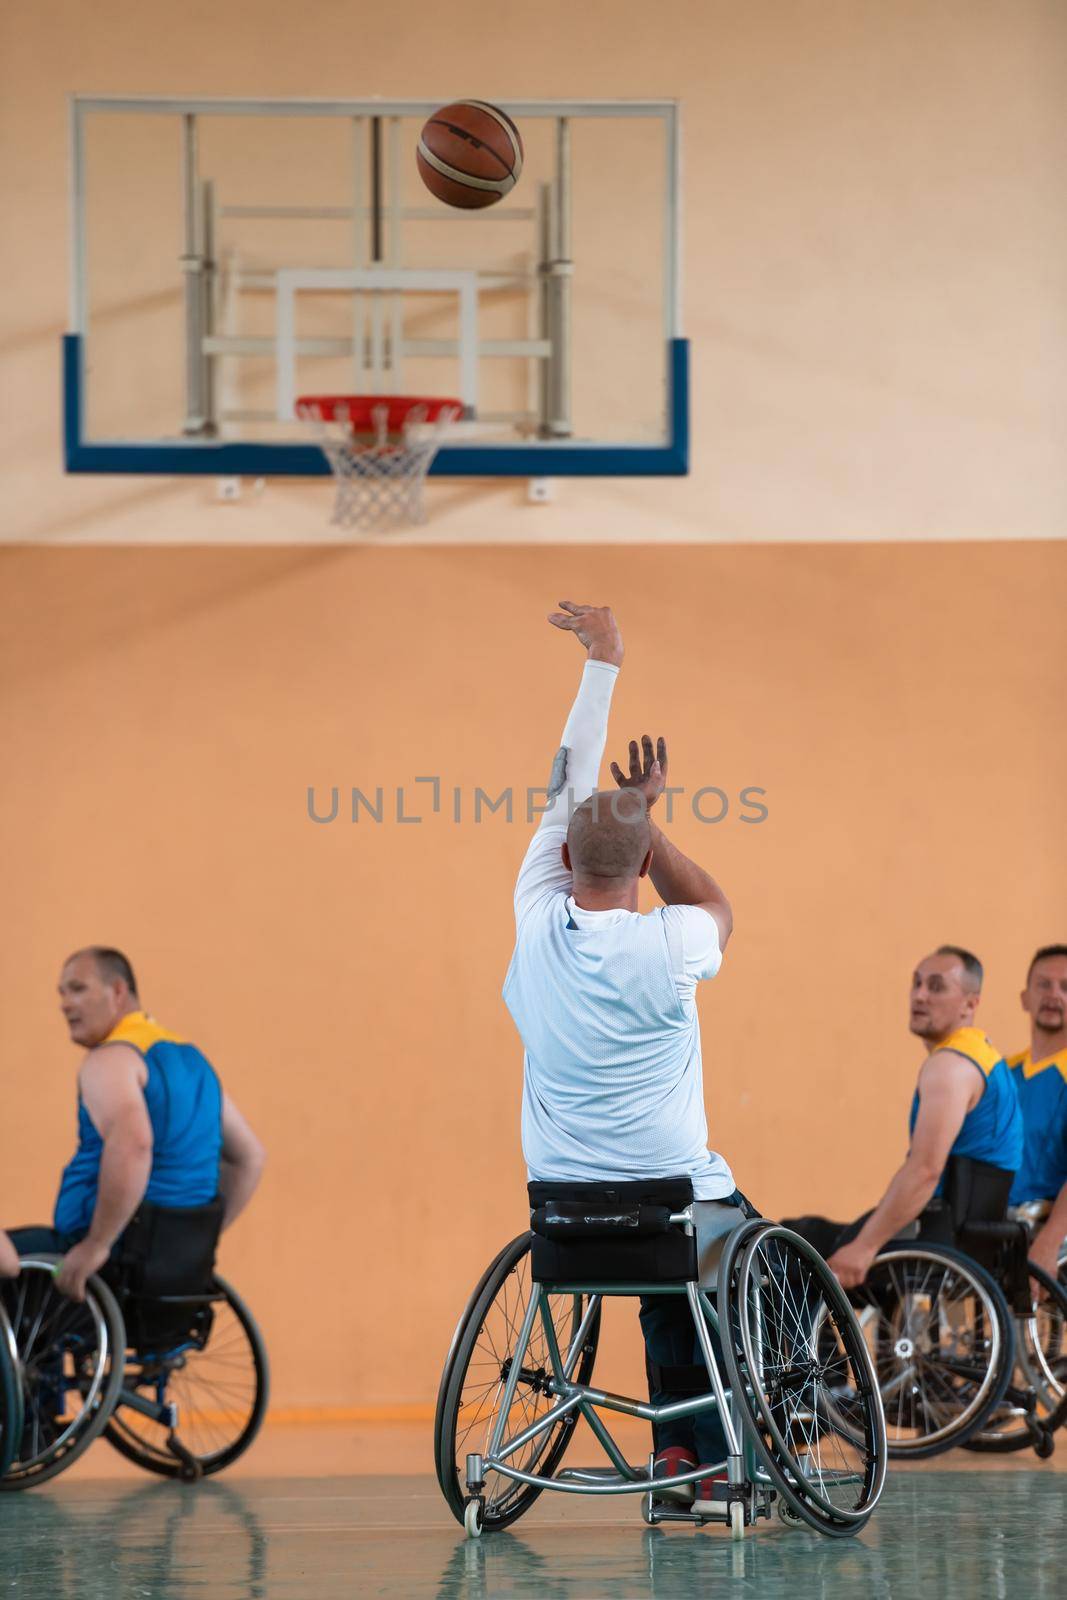 Disabled War or work veterans mixed race and age basketball teams in wheelchairs playing a training match in a sports gym hall. Handicapped people rehabilitation and inclusion concept.Hi quality photo